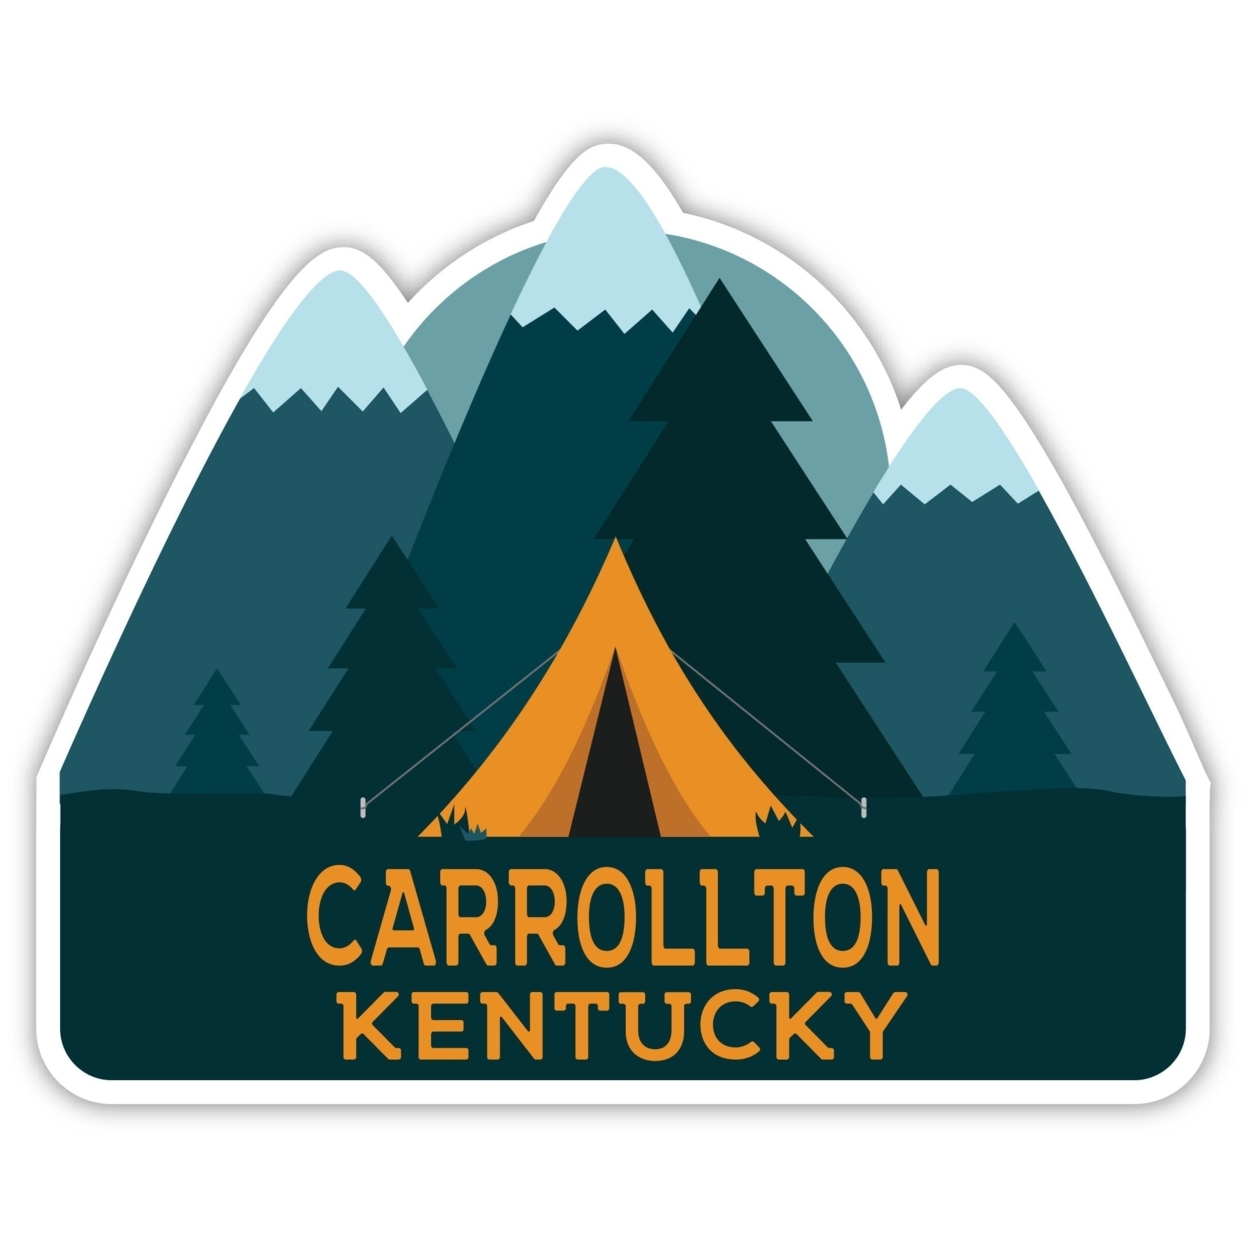 Carrollton Kentucky Souvenir Decorative Stickers (Choose Theme And Size) - 4-Pack, 6-Inch, Tent